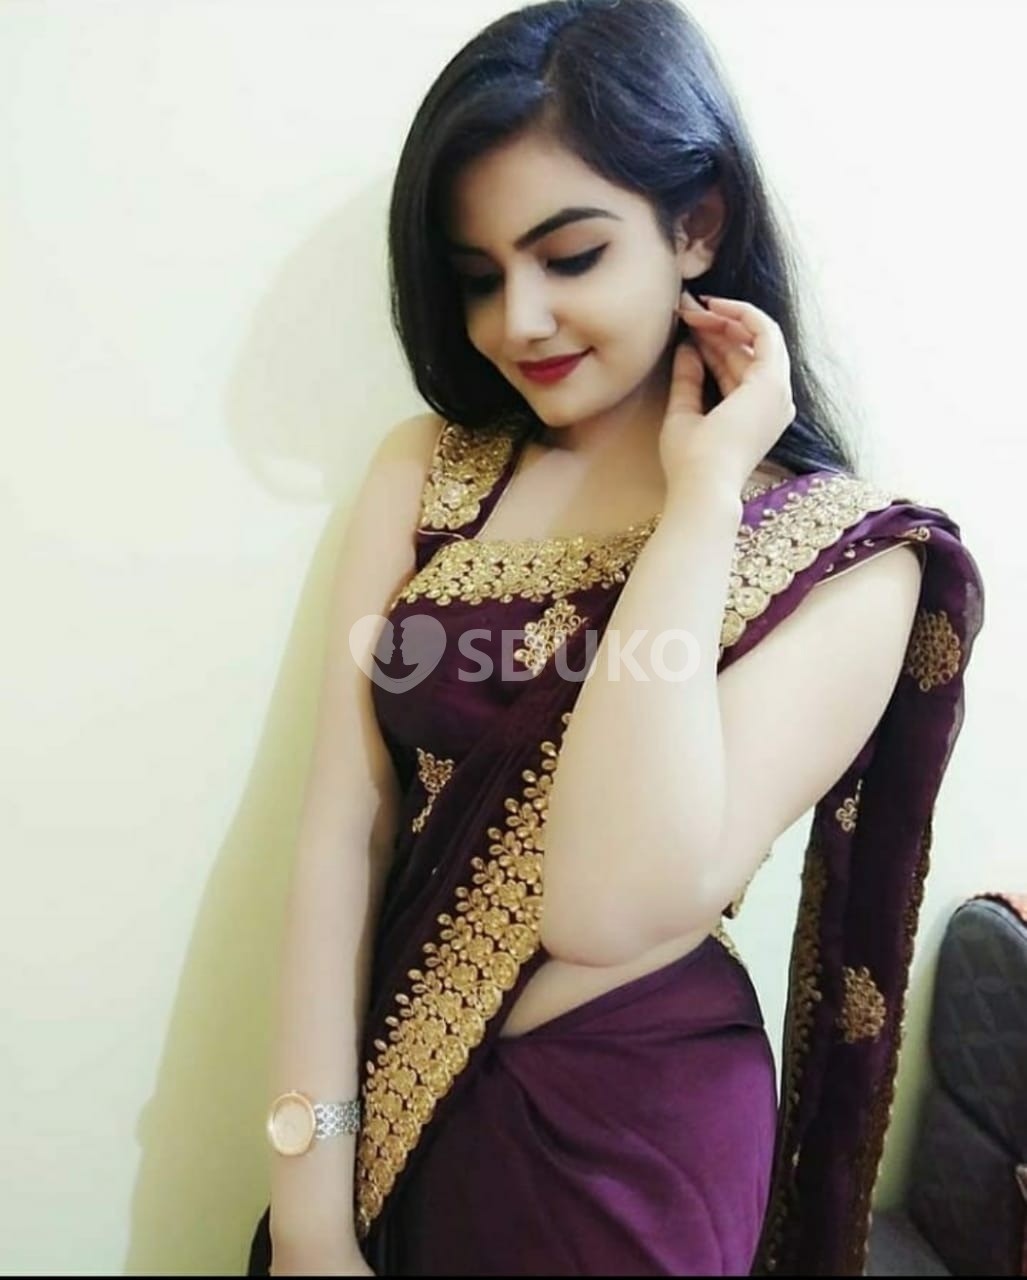 Amritsar 🔅 LOW RATE(Malika)ESCORT FULL HARD FUCK WITH NAUGHTY IF YOU WANT TO FUCK MY PUSSY WITH BIG BOOBS GIRLS- CALL